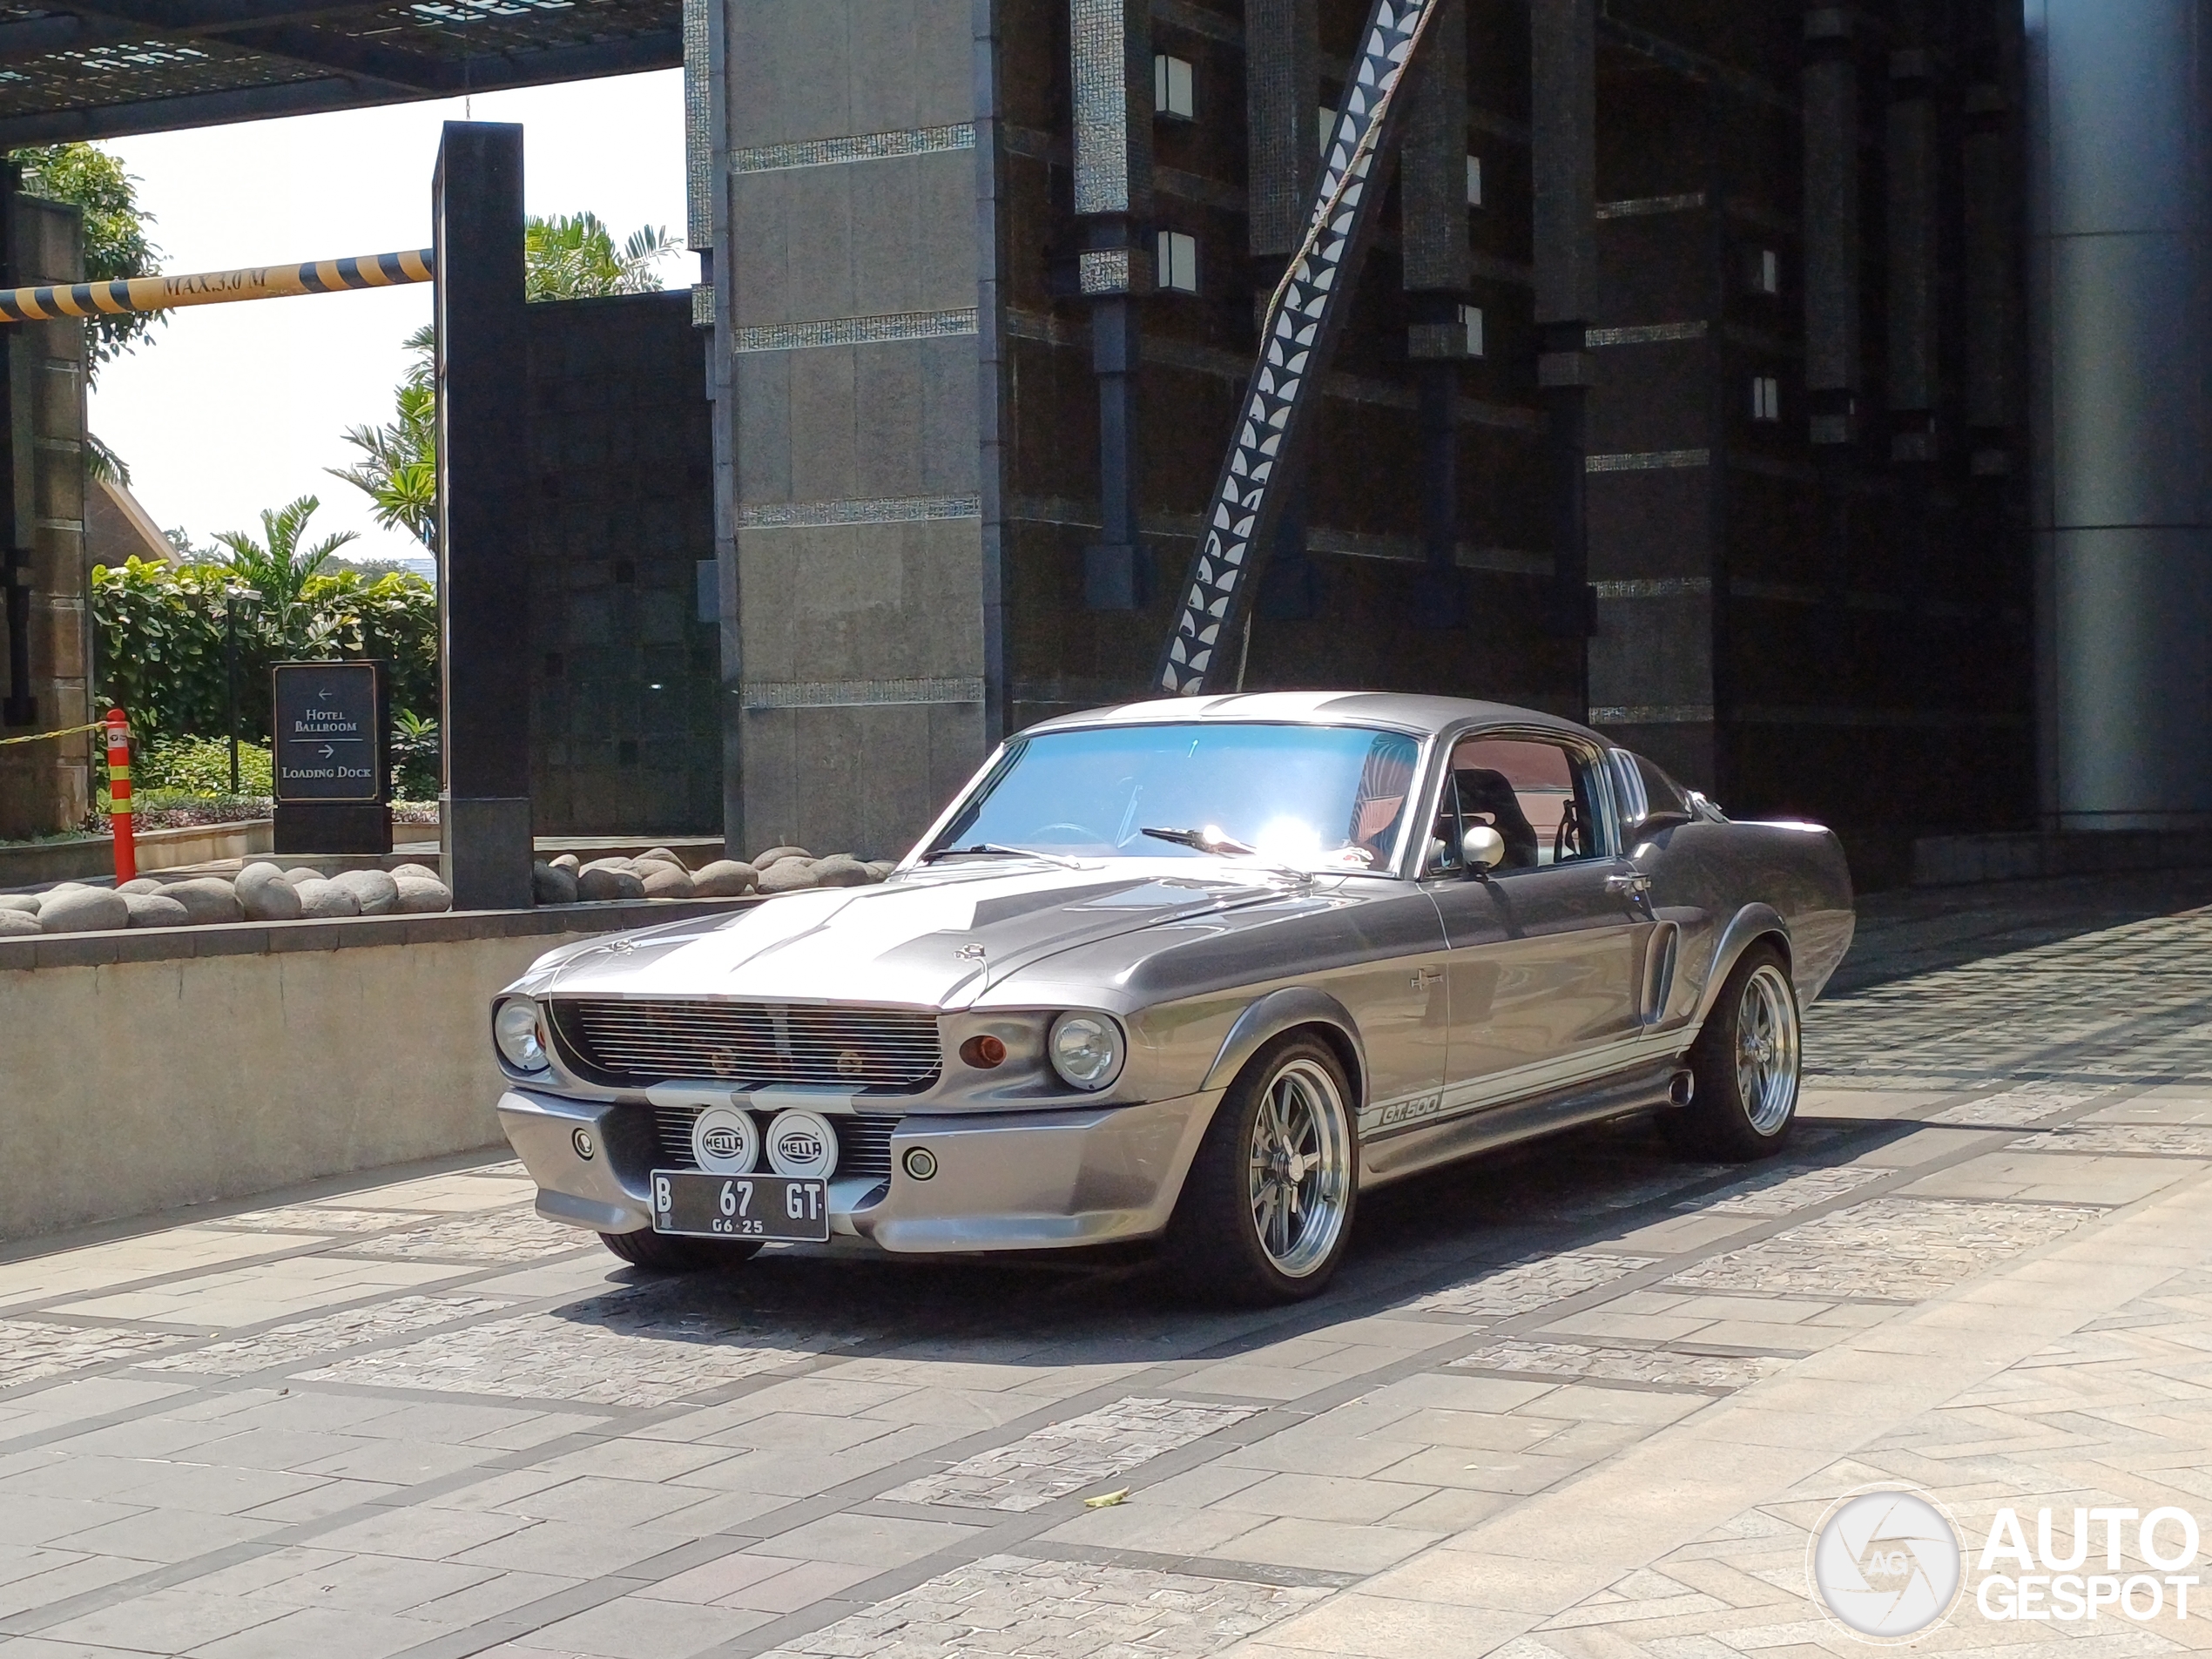 Is this the most beautiful Mustang ever?